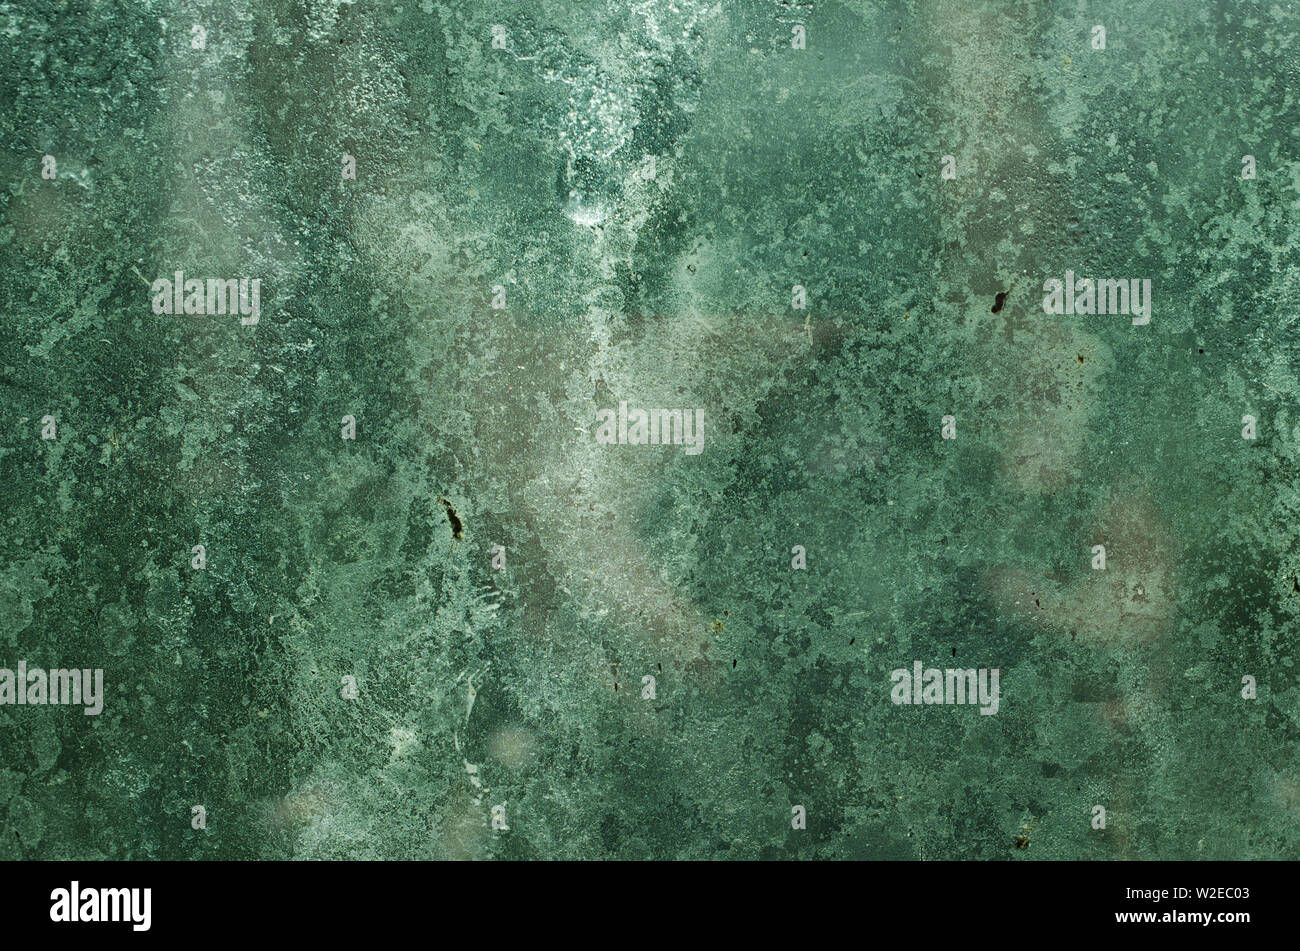 Green glass texture of an old bottle, Pattern for grafic digital template Stock Photo